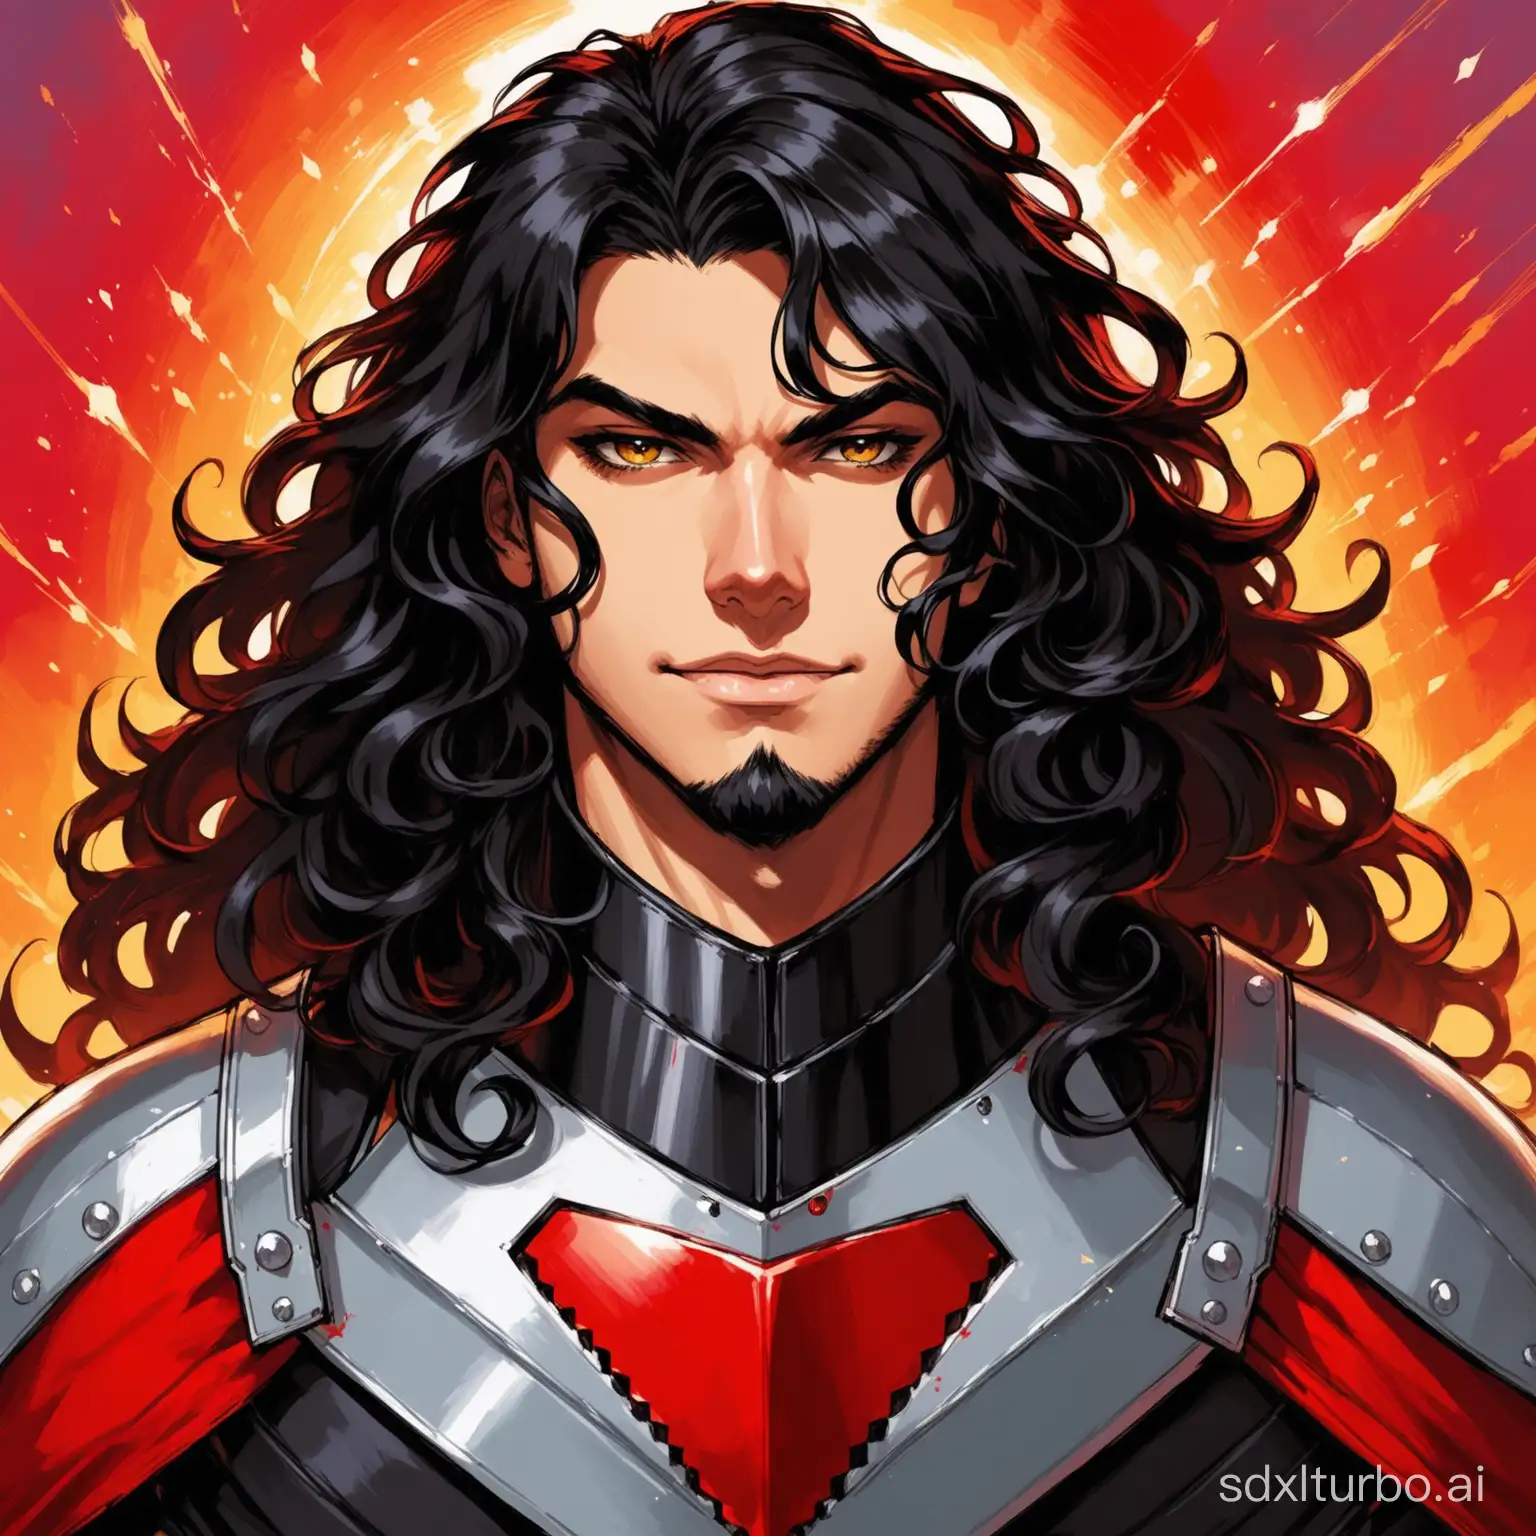 A metal rockstar superhero named Cortland who likes acrylic painting and video games and being awesome. Male, late 20s, long dark curly hair. Based and red pilled.